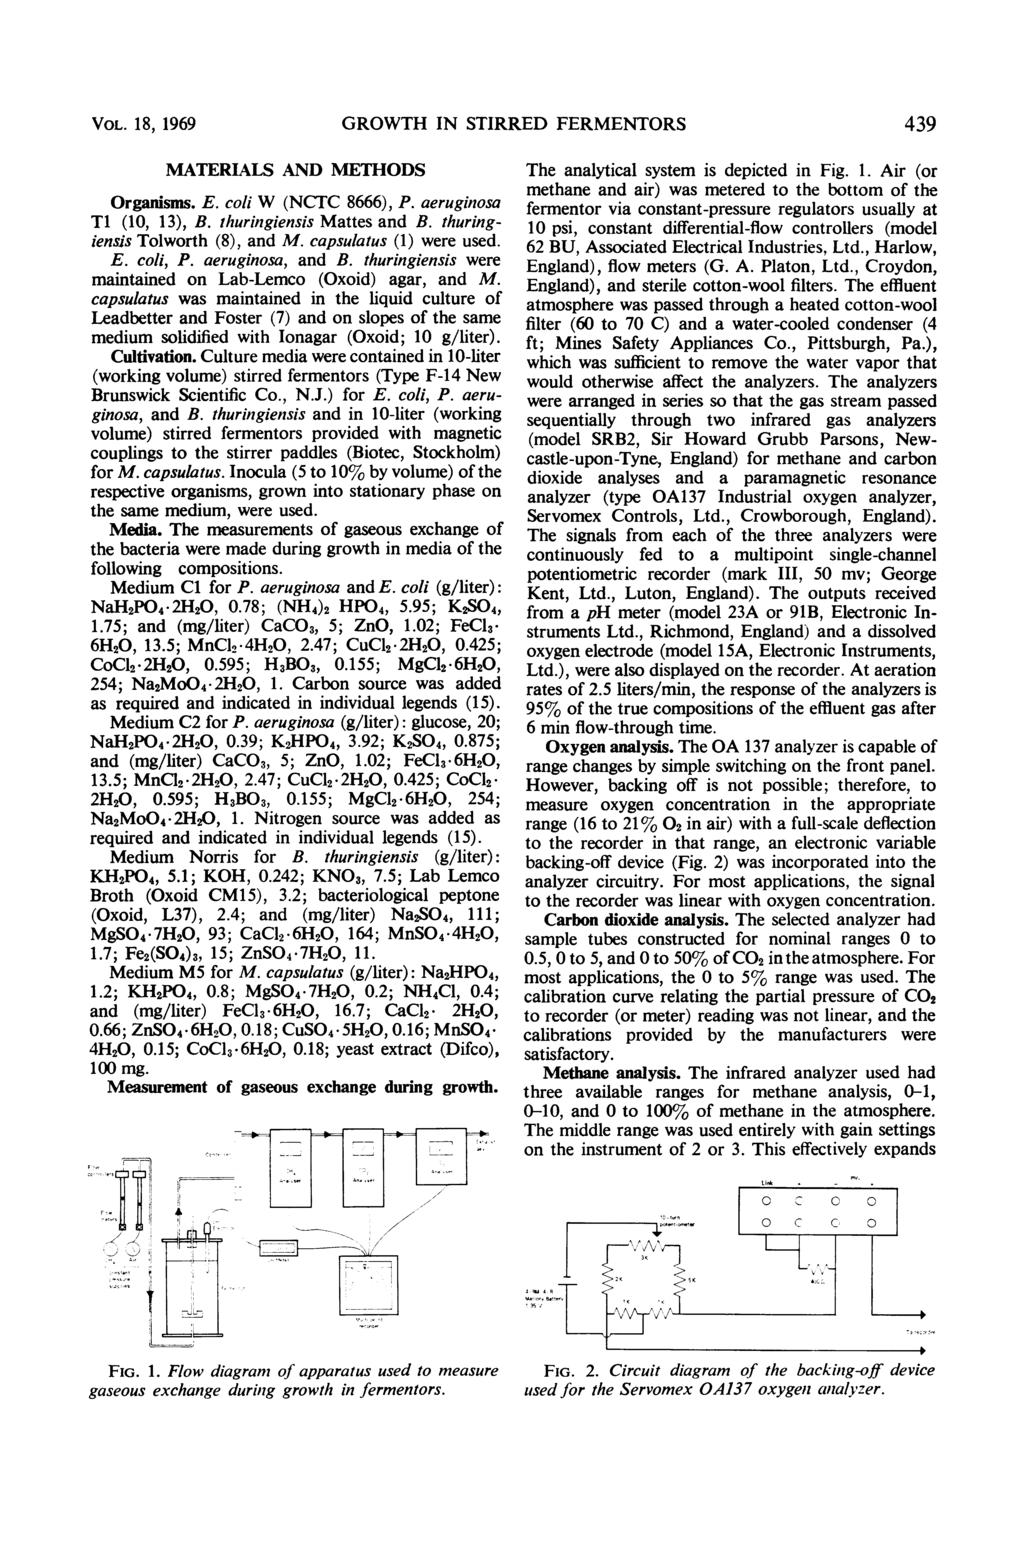 VOL. 18, 1969 GROWTH IN STIRRED FERMENTORS 439 MATERIALS AND METHODS Organisms. E. coli W (NCTC 8666), P. aeruginosa T1 (10, 13), B. thuringiensis Mattes and B. thuringiensis Tolworth (8), and M.